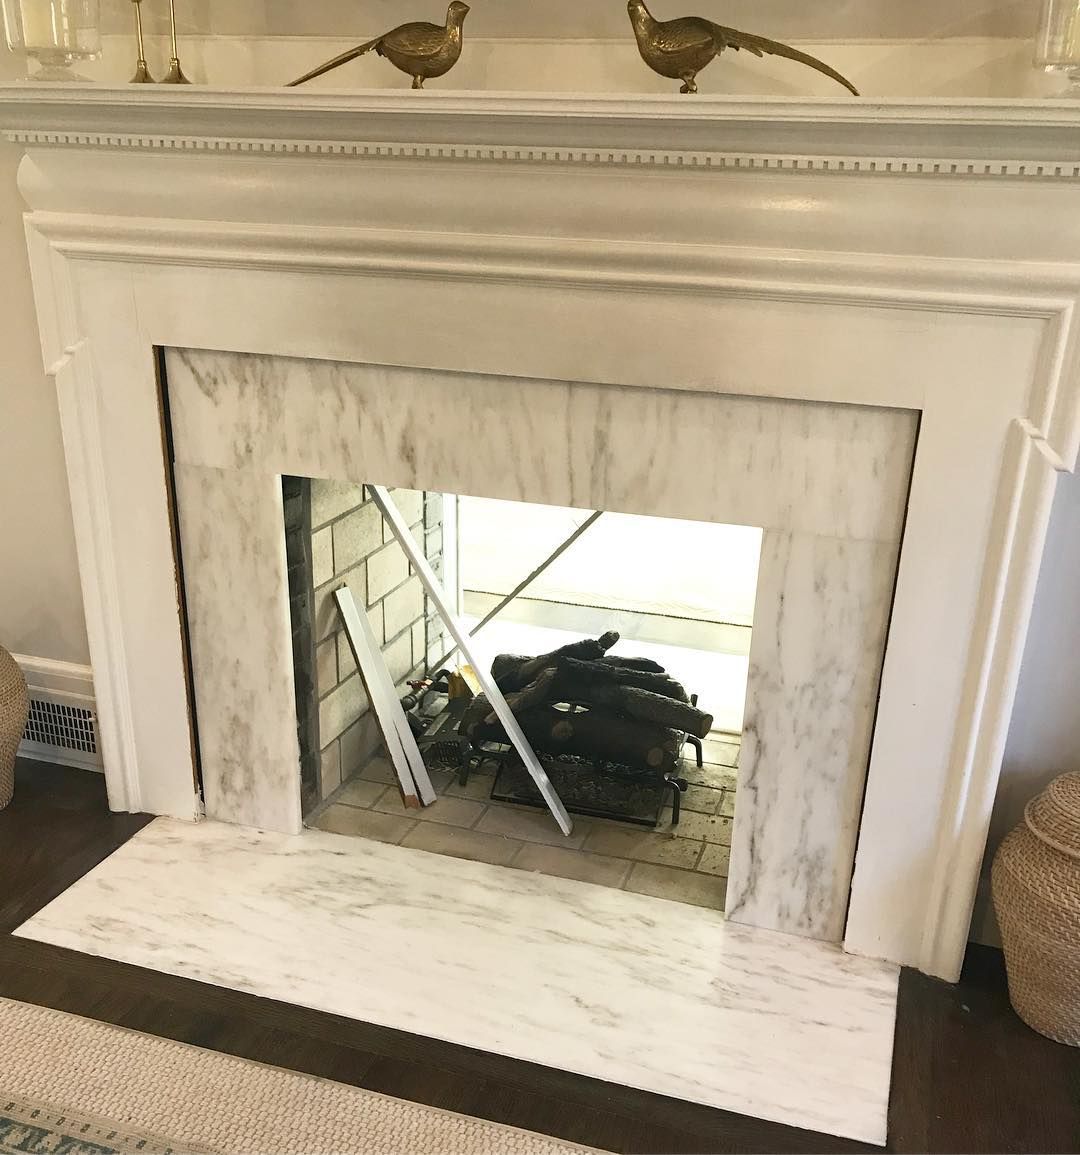 Fireplace Cover Up Unique Pin On Vacation Home